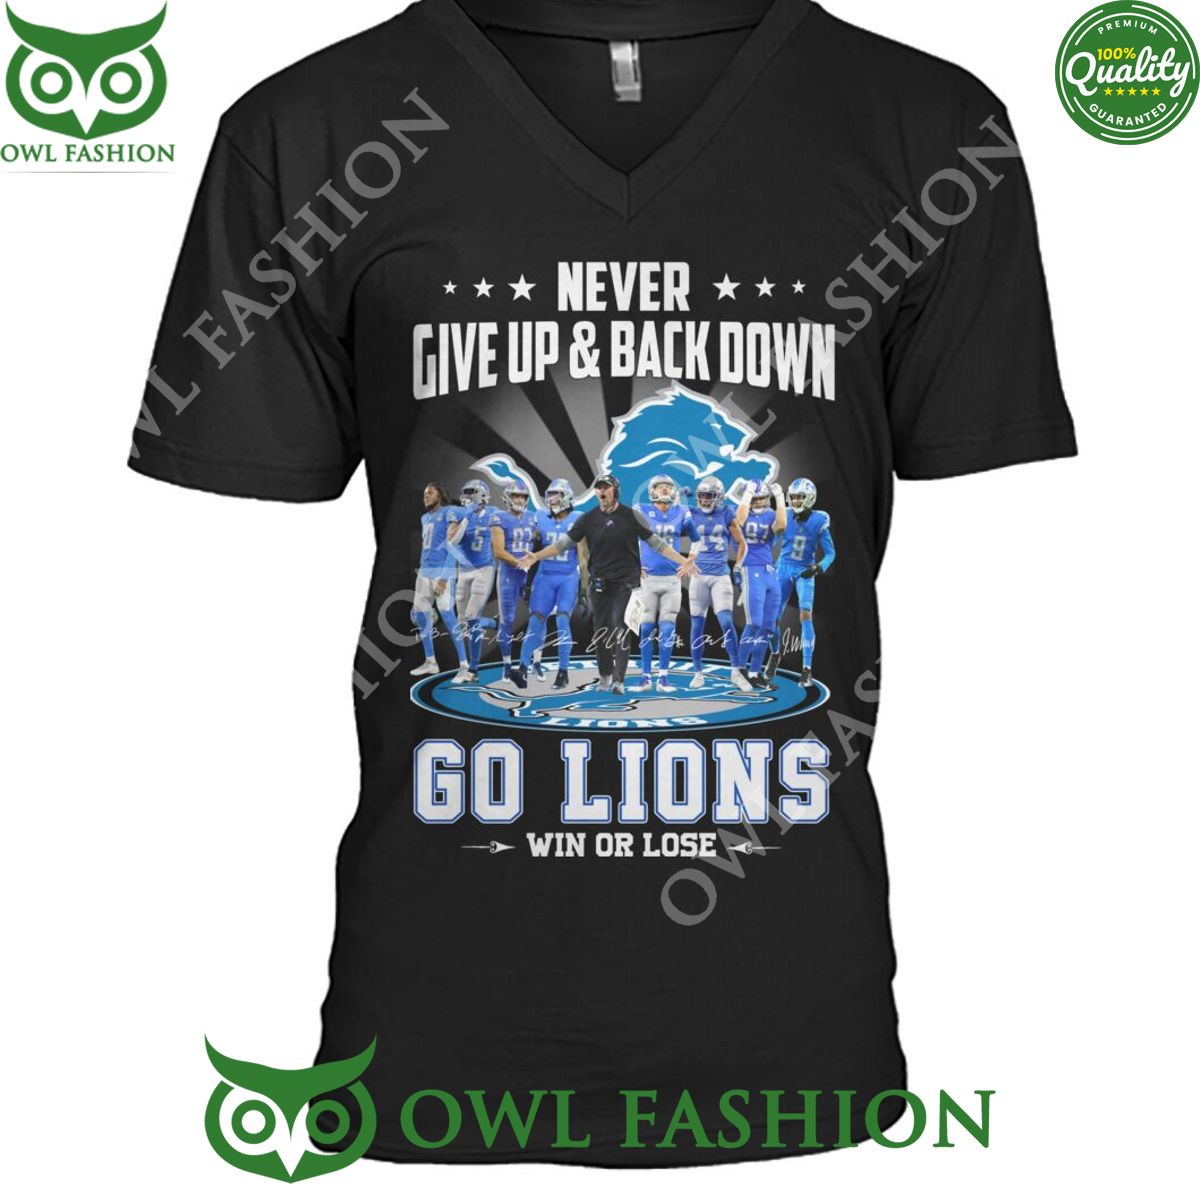 never give up and back down go lions win or lose t shirt detroit lions nfl 1 ctnEf.jpg